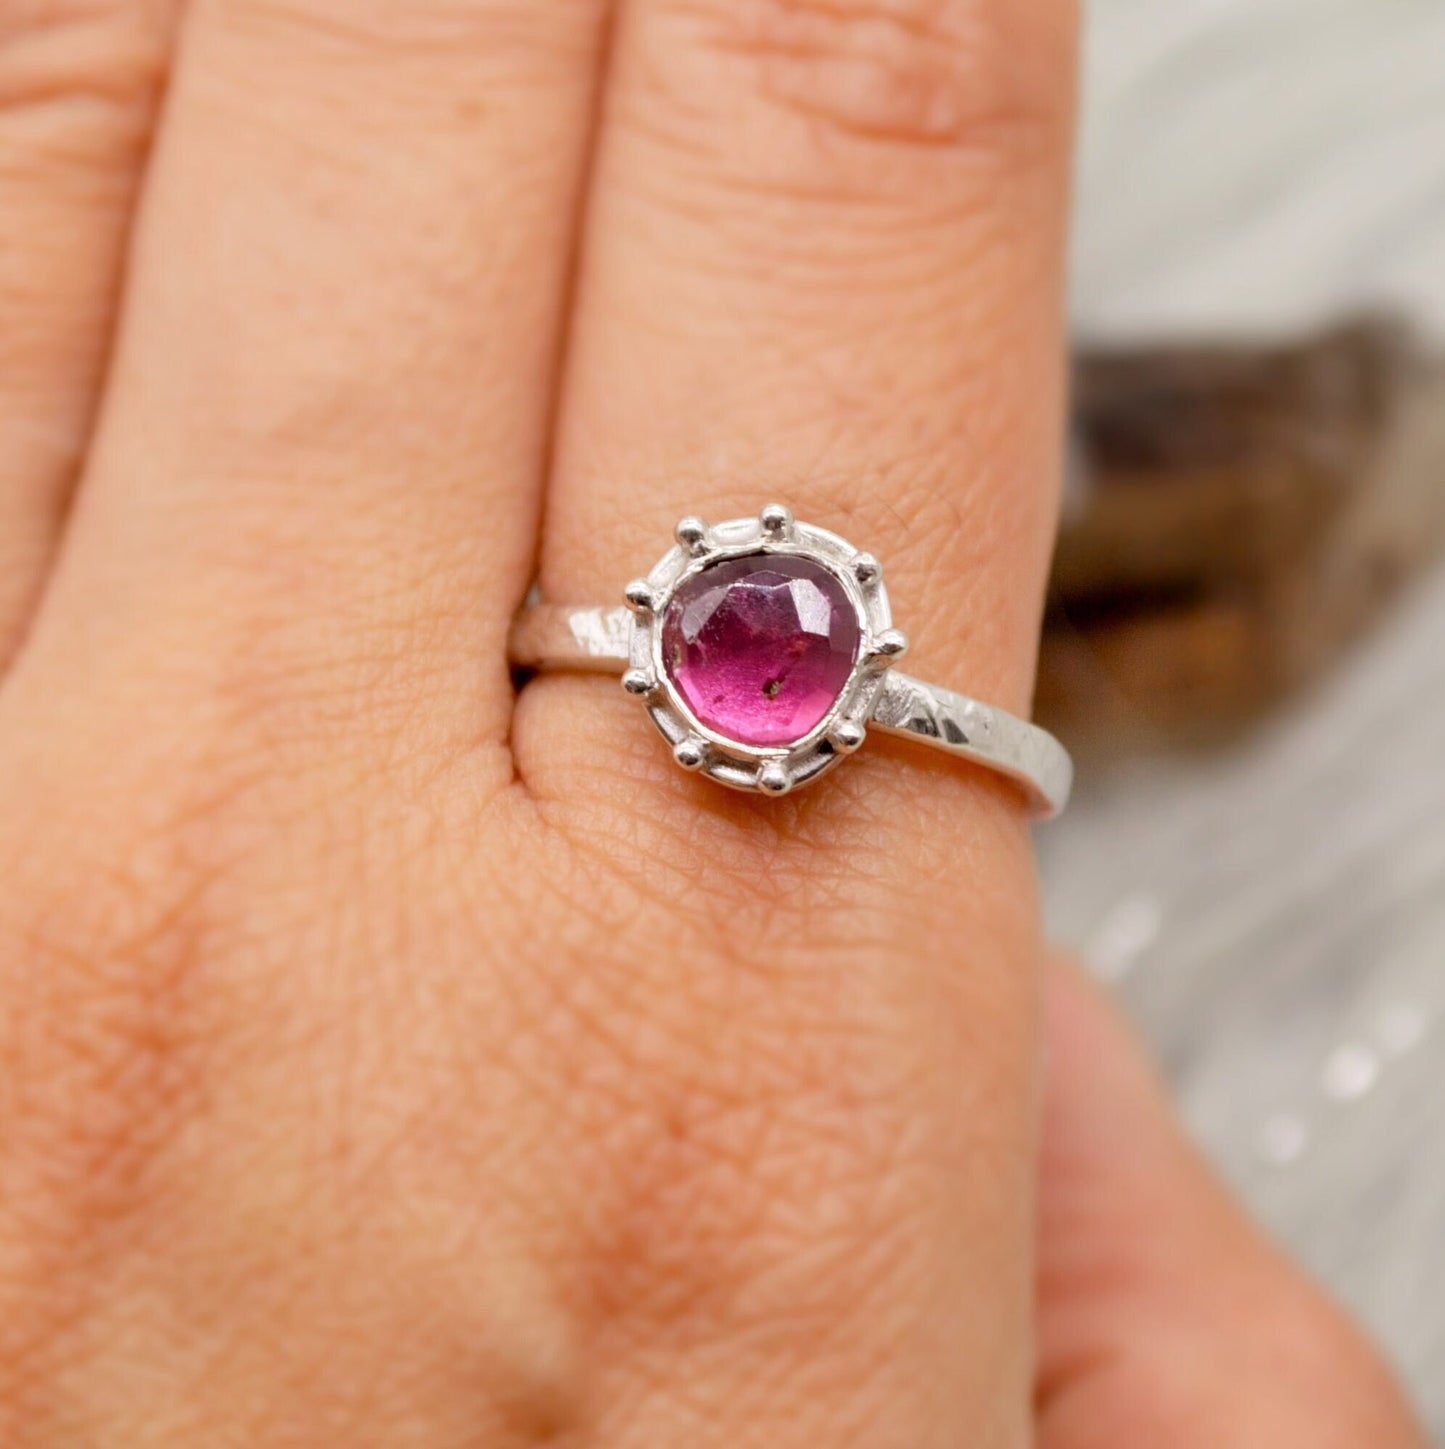 Pink Tourmaline Ring, 925 Sterling Silver Rings, Tourmaline Jewelry, October Birthstone, Gifts For Her, Rings For Women, Stackable Gemstone